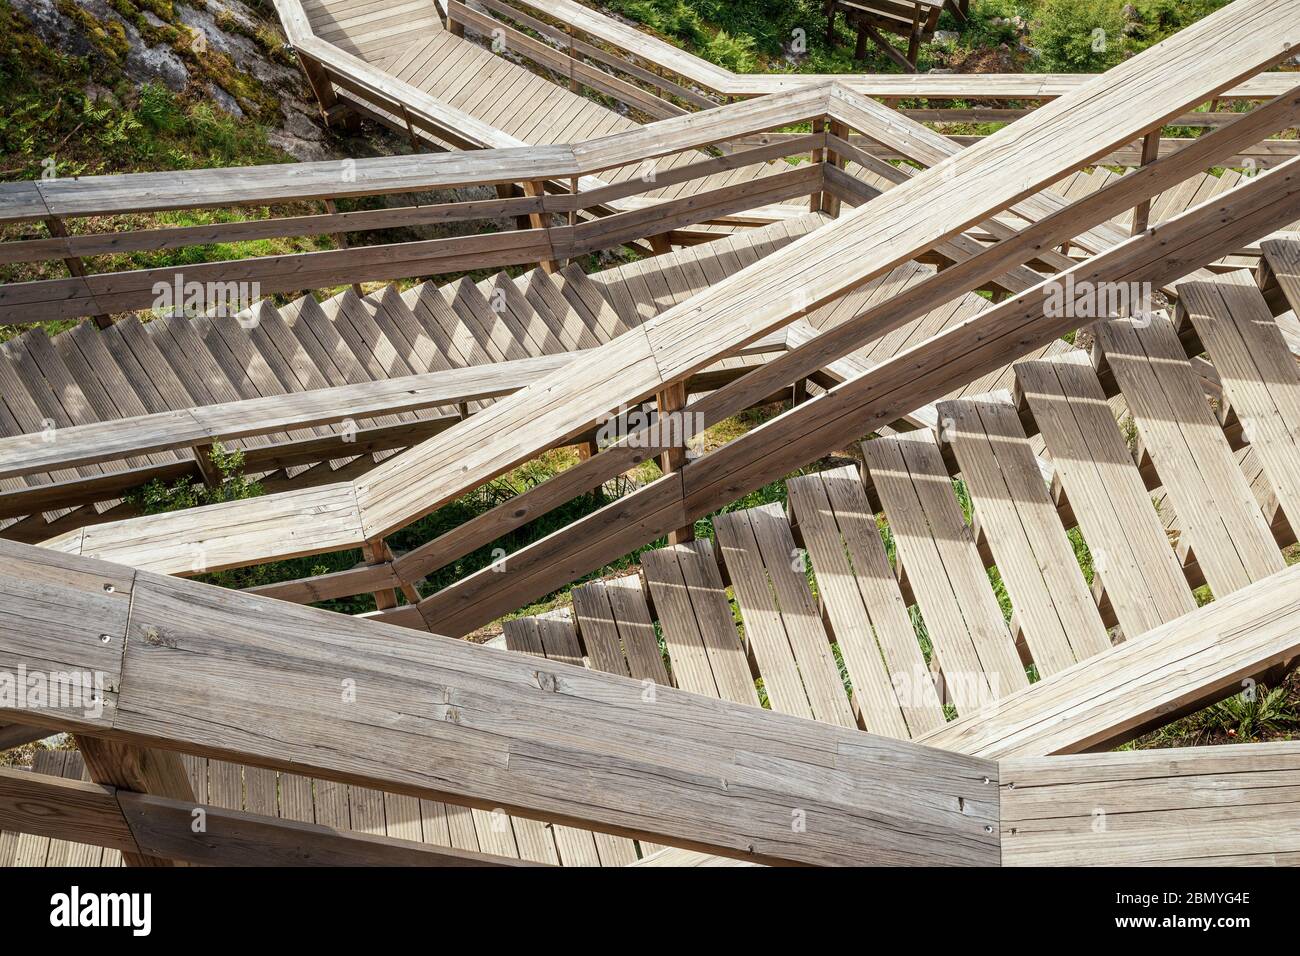 Detail of wooden stairs and handrails of the Paiva Walkways, near Arouca in Portugal. Stock Photo